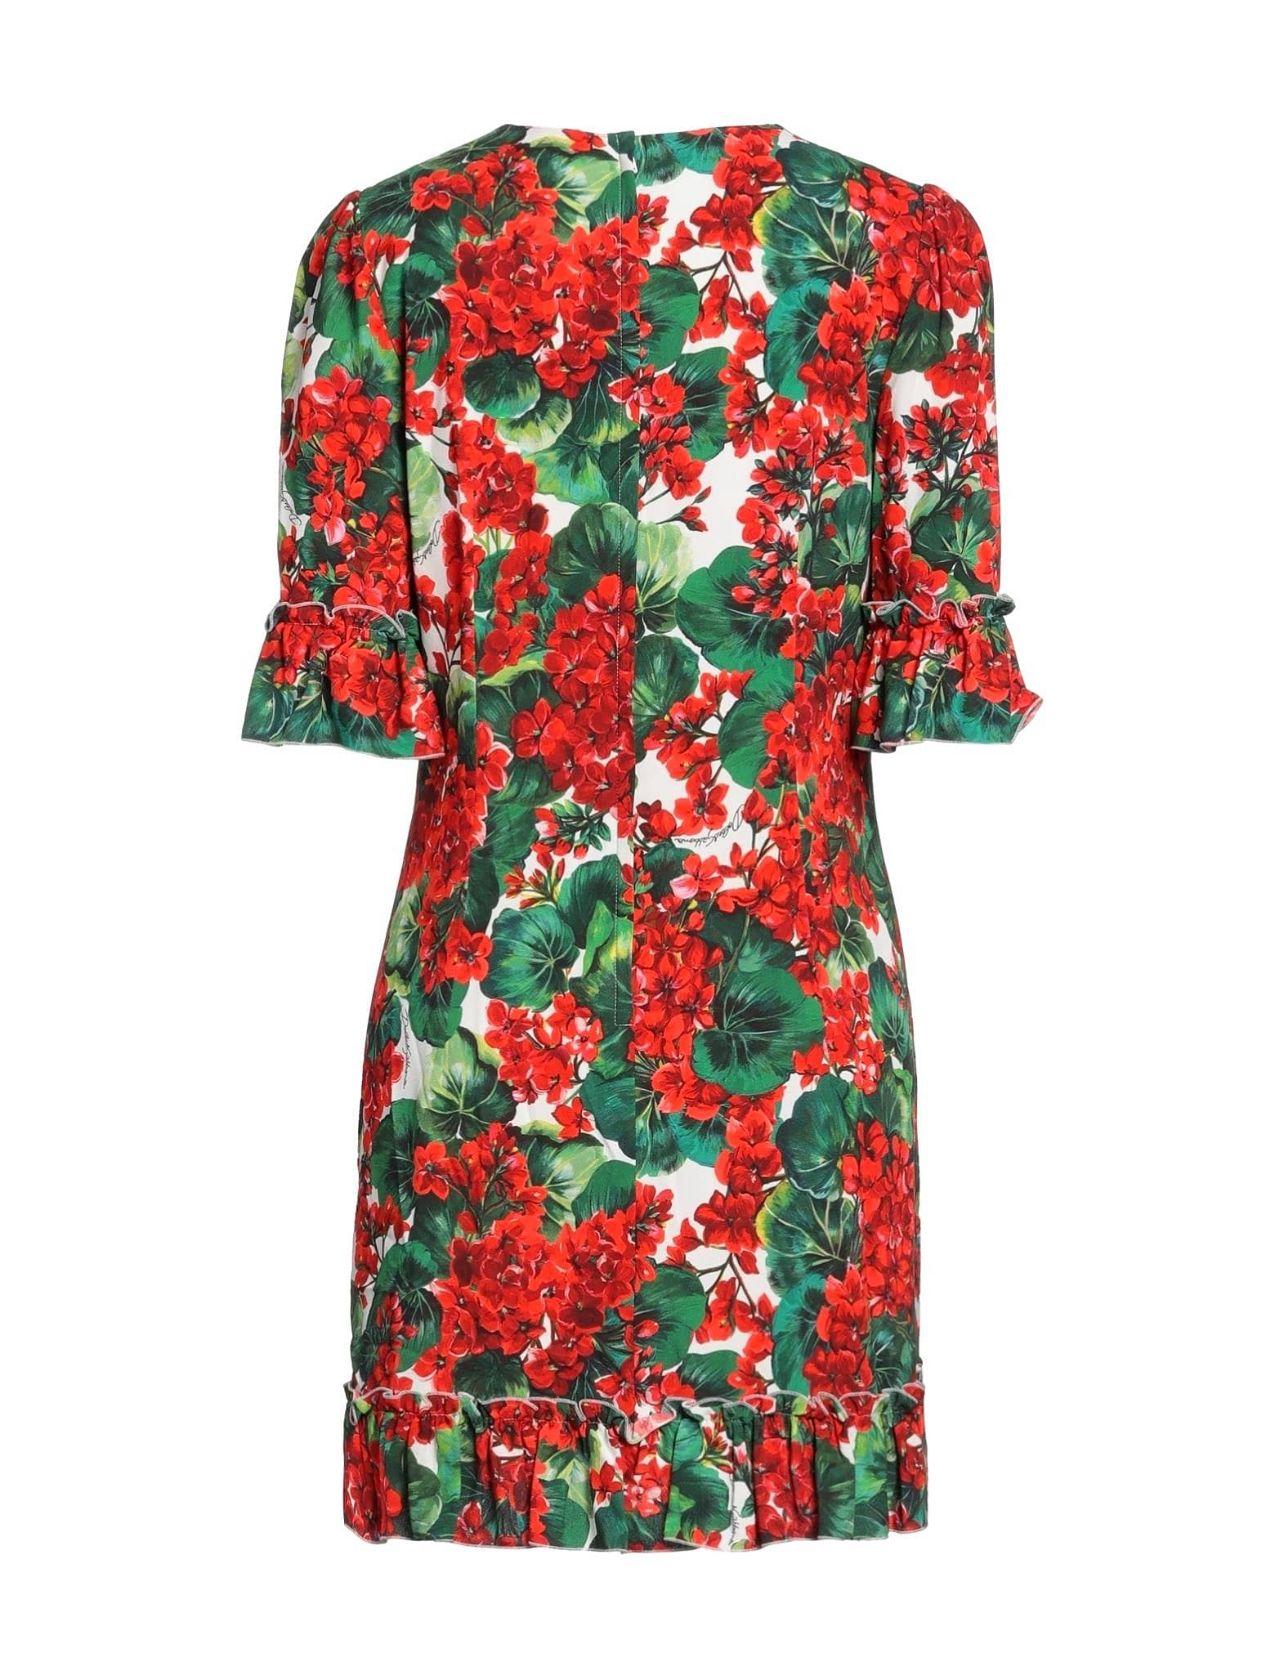 Dolce & Gabbana Red Geranium
printed Viscose mid length dress

Size 40IT, UK8, S.

97% Viscose, 3 % Elasthan

Brand new with tags

Please check my other DG clothing & accessories!